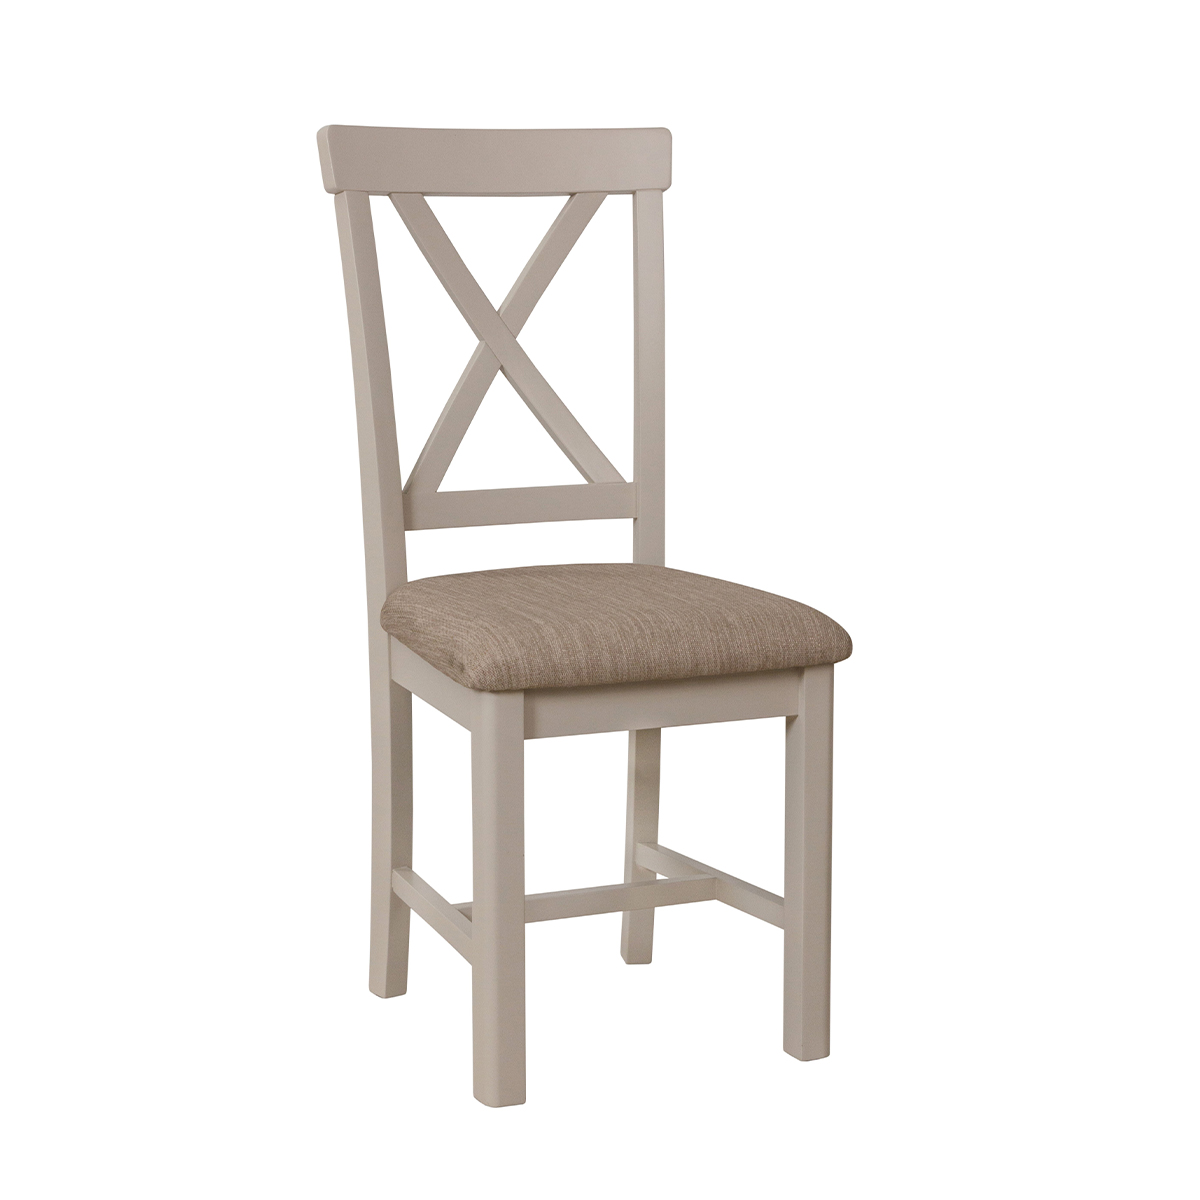 Charles Bentley Sandford Pair Of Dining Chairs Dove Grey